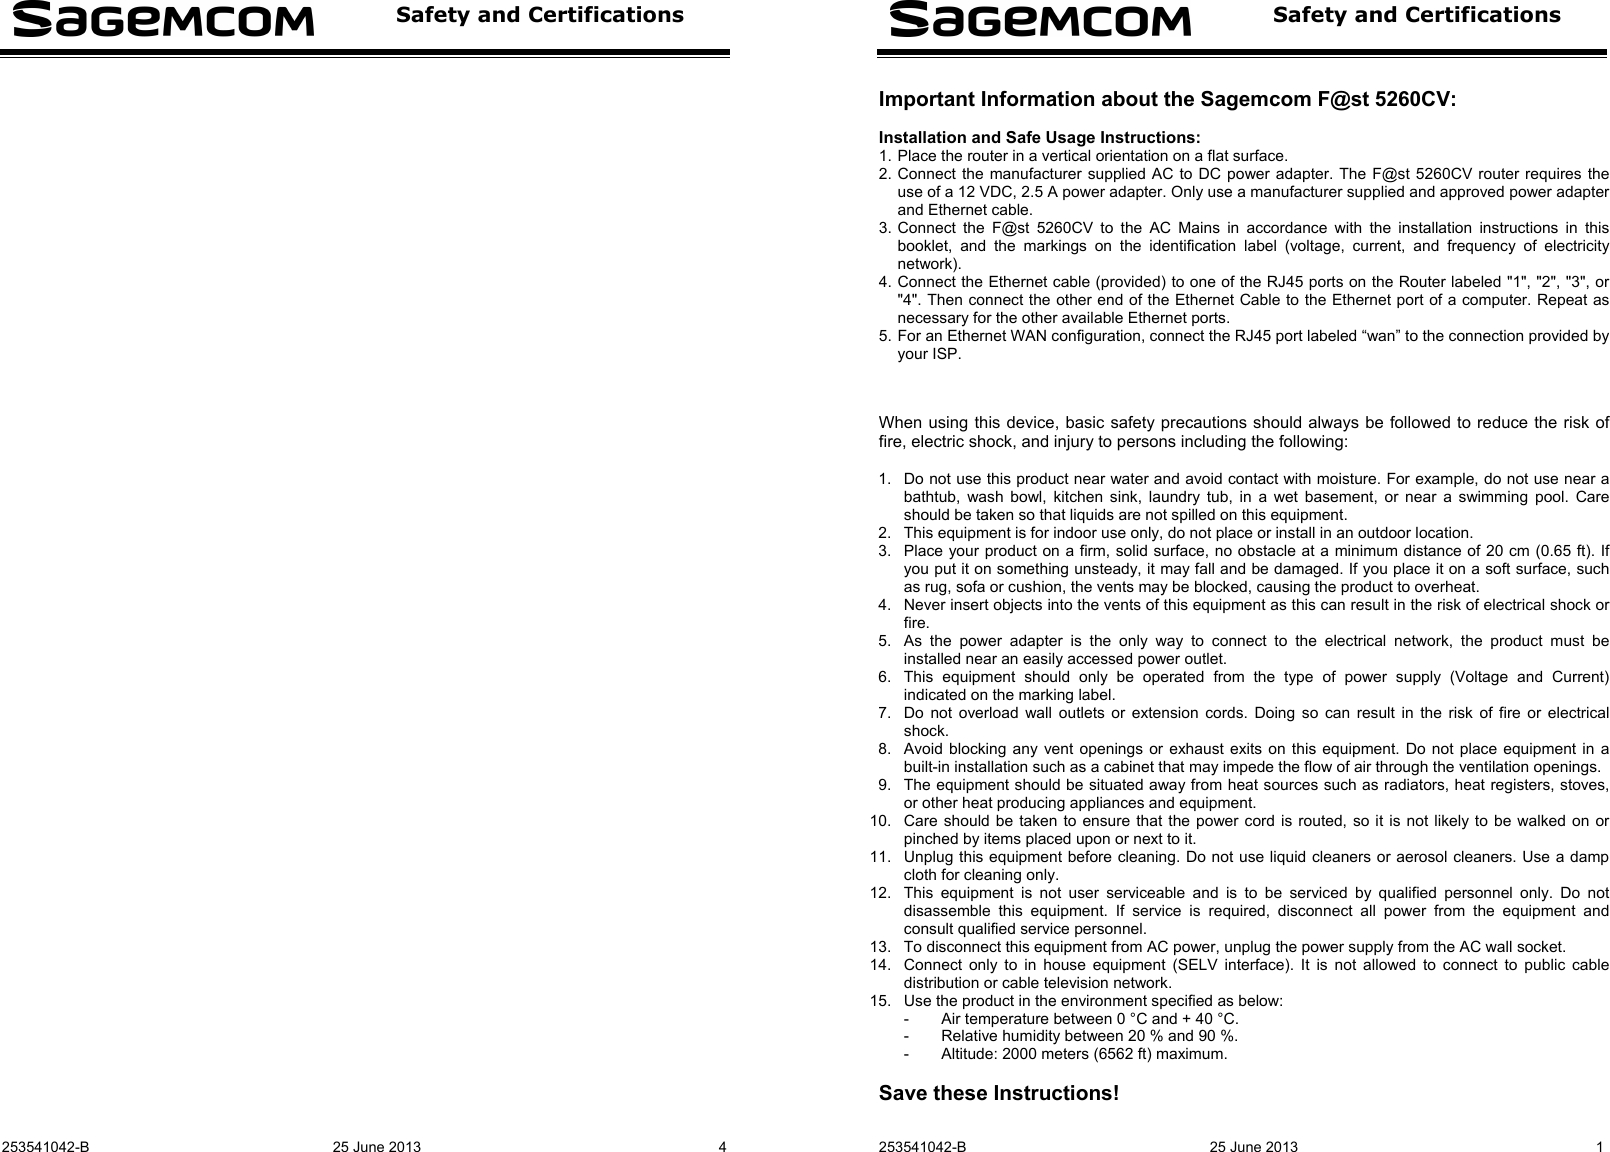  Safety and Certifications   253541042-B 25 June 2013  4    Safety and Certifications   253541042-B 25 June 2013  1 Important Information about the Sagemcom F@st 5260CV:  Installation and Safe Usage Instructions: 1. Place the router in a vertical orientation on a flat surface. 2. Connect the manufacturer supplied AC to DC power adapter. The F@st 5260CV router requires the use of a 12 VDC, 2.5 A power adapter. Only use a manufacturer supplied and approved power adapter and Ethernet cable. 3. Connect the F@st 5260CV to the AC Mains in accordance with the installation instructions in this booklet, and the markings on the identification label (voltage, current, and frequency of electricity network). 4. Connect the Ethernet cable (provided) to one of the RJ45 ports on the Router labeled &quot;1&quot;, &quot;2&quot;, &quot;3&quot;, or &quot;4&quot;. Then connect the other end of the Ethernet Cable to the Ethernet port of a computer. Repeat as necessary for the other available Ethernet ports. 5. For an Ethernet WAN configuration, connect the RJ45 port labeled “wan” to the connection provided by your ISP.    When using this device, basic safety precautions should always be followed to reduce the risk of fire, electric shock, and injury to persons including the following:  1.  Do not use this product near water and avoid contact with moisture. For example, do not use near a bathtub, wash bowl, kitchen sink, laundry tub, in a wet basement, or near a swimming pool. Care should be taken so that liquids are not spilled on this equipment. 2.  This equipment is for indoor use only, do not place or install in an outdoor location. 3.  Place your product on a firm, solid surface, no obstacle at a minimum distance of 20 cm (0.65 ft). If you put it on something unsteady, it may fall and be damaged. If you place it on a soft surface, such as rug, sofa or cushion, the vents may be blocked, causing the product to overheat. 4.  Never insert objects into the vents of this equipment as this can result in the risk of electrical shock or fire. 5.  As the power adapter is the only way to connect to the electrical network, the product must be installed near an easily accessed power outlet. 6.  This equipment should only be operated from the type of power supply (Voltage and Current) indicated on the marking label. 7.  Do not overload wall outlets or extension cords. Doing so can result in the risk of fire or electrical shock. 8.  Avoid blocking any vent openings or exhaust exits on this equipment. Do not place equipment in a built-in installation such as a cabinet that may impede the flow of air through the ventilation openings. 9.  The equipment should be situated away from heat sources such as radiators, heat registers, stoves, or other heat producing appliances and equipment. 10.  Care should be taken to ensure that the power cord is routed, so it is not likely to be walked on or pinched by items placed upon or next to it. 11.  Unplug this equipment before cleaning. Do not use liquid cleaners or aerosol cleaners. Use a damp cloth for cleaning only. 12.  This equipment is not user serviceable and is to be serviced by qualified personnel only. Do not disassemble this equipment. If service is required, disconnect all power from the equipment and consult qualified service personnel. 13.  To disconnect this equipment from AC power, unplug the power supply from the AC wall socket. 14.  Connect only to in house equipment (SELV interface). It is not allowed to connect to public cable distribution or cable television network. 15.  Use the product in the environment specified as below: -  Air temperature between 0 °C and + 40 °C. -  Relative humidity between 20 % and 90 %. -  Altitude: 2000 meters (6562 ft) maximum.  Save these Instructions! 